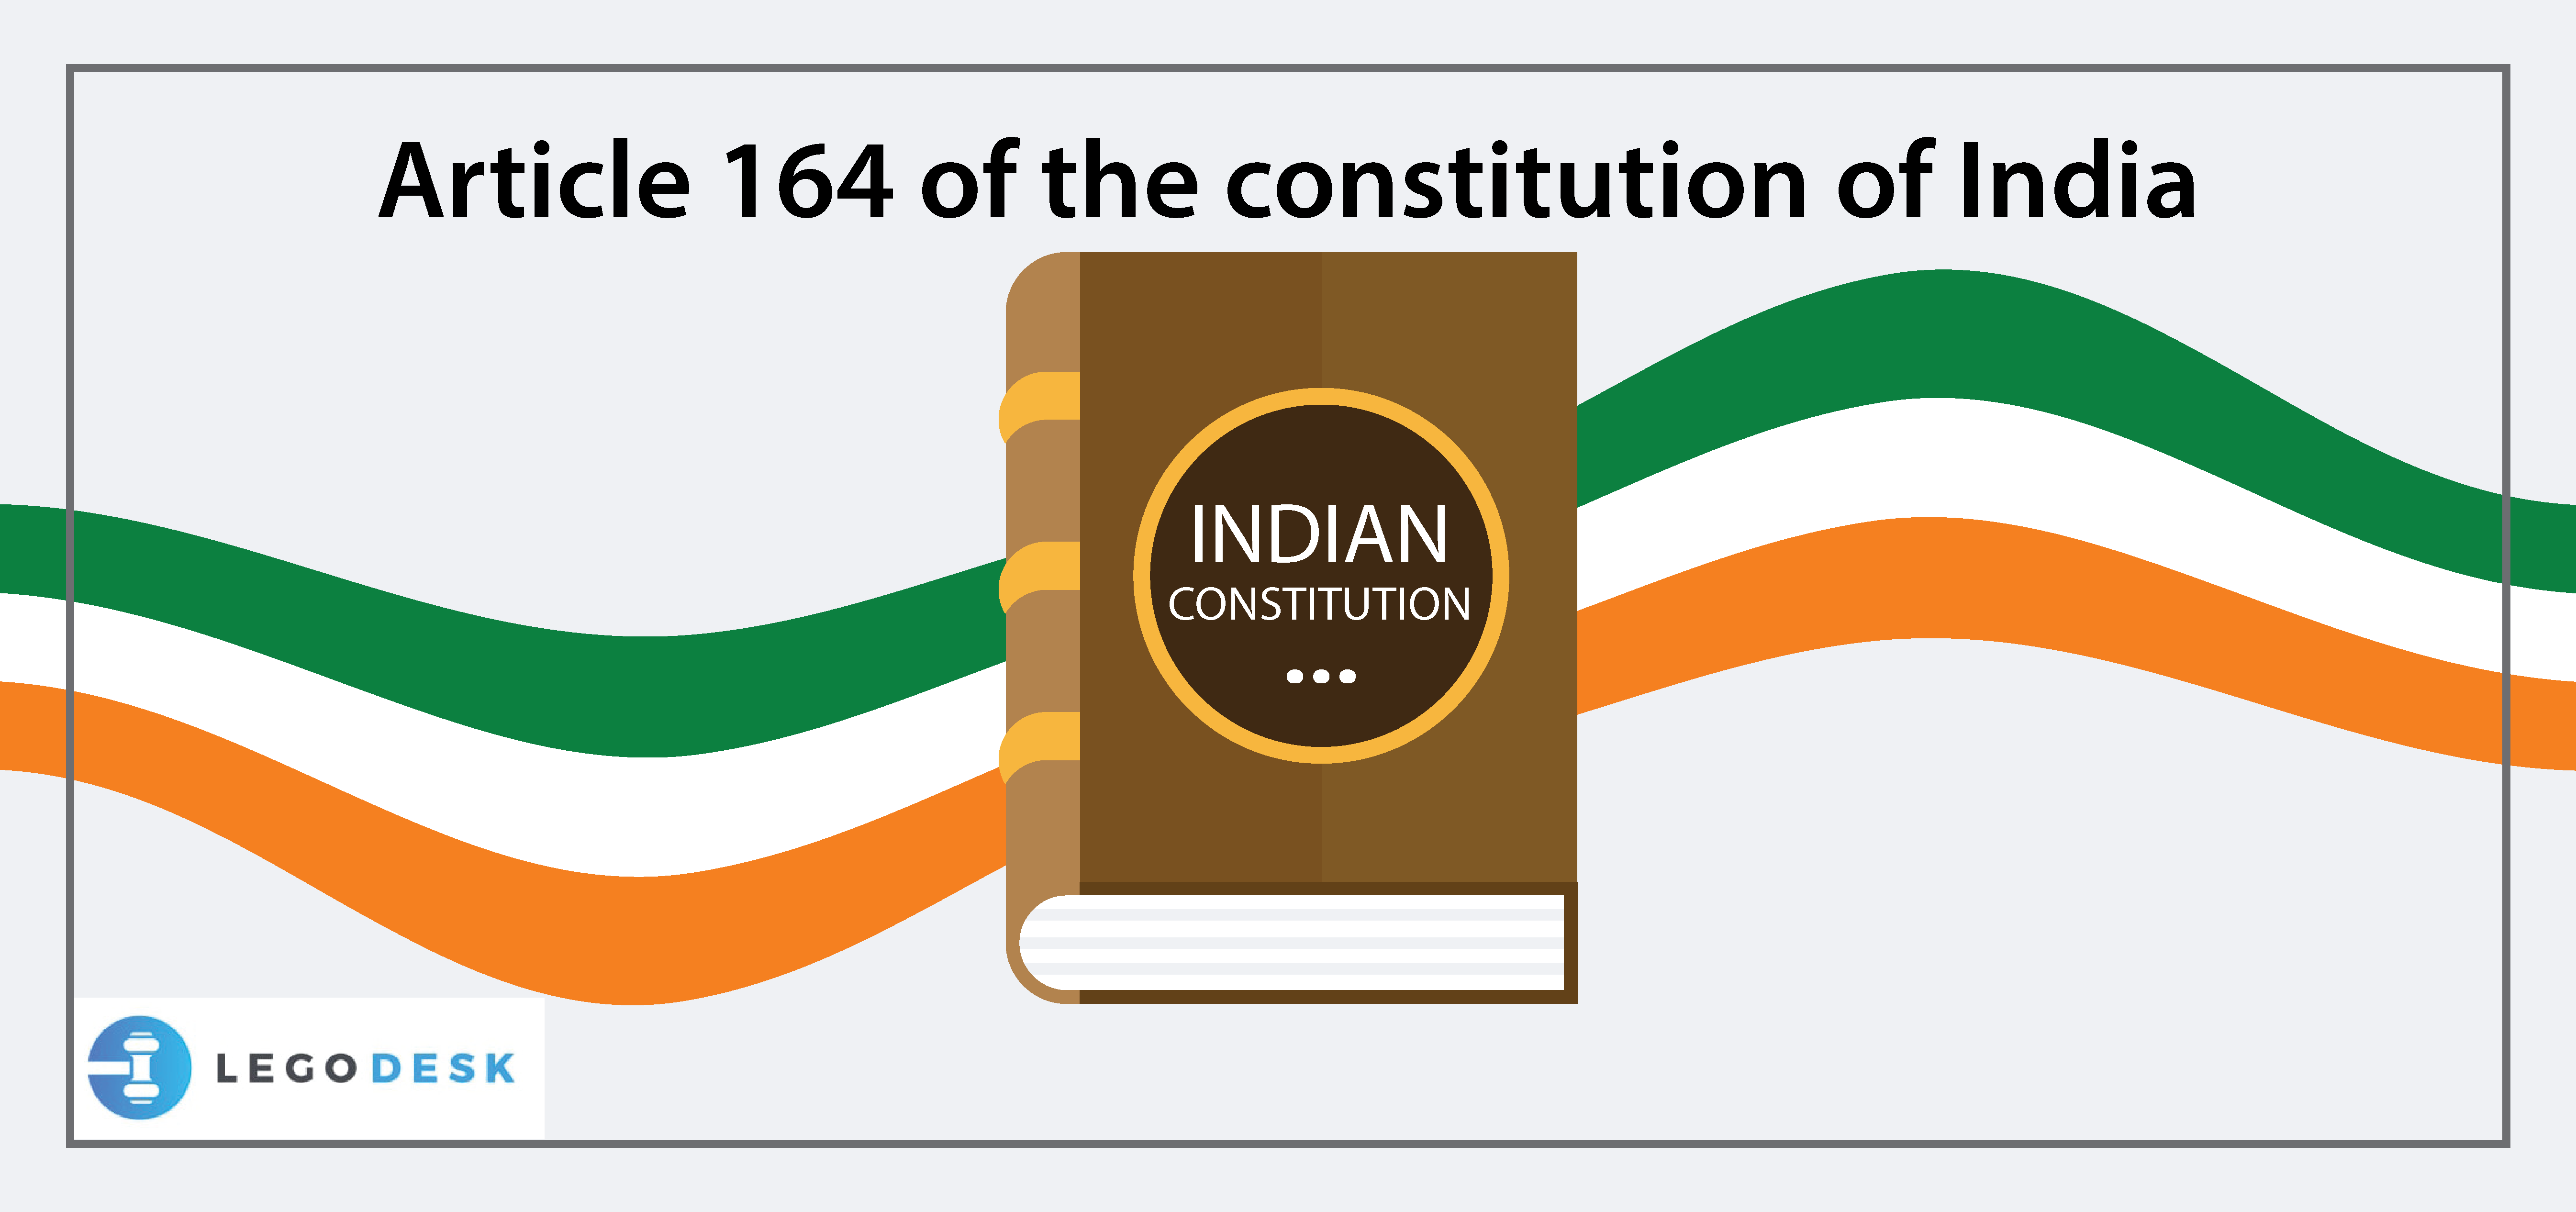 Article 164(4) of the Indian Constitution "EMPOWER IAS"